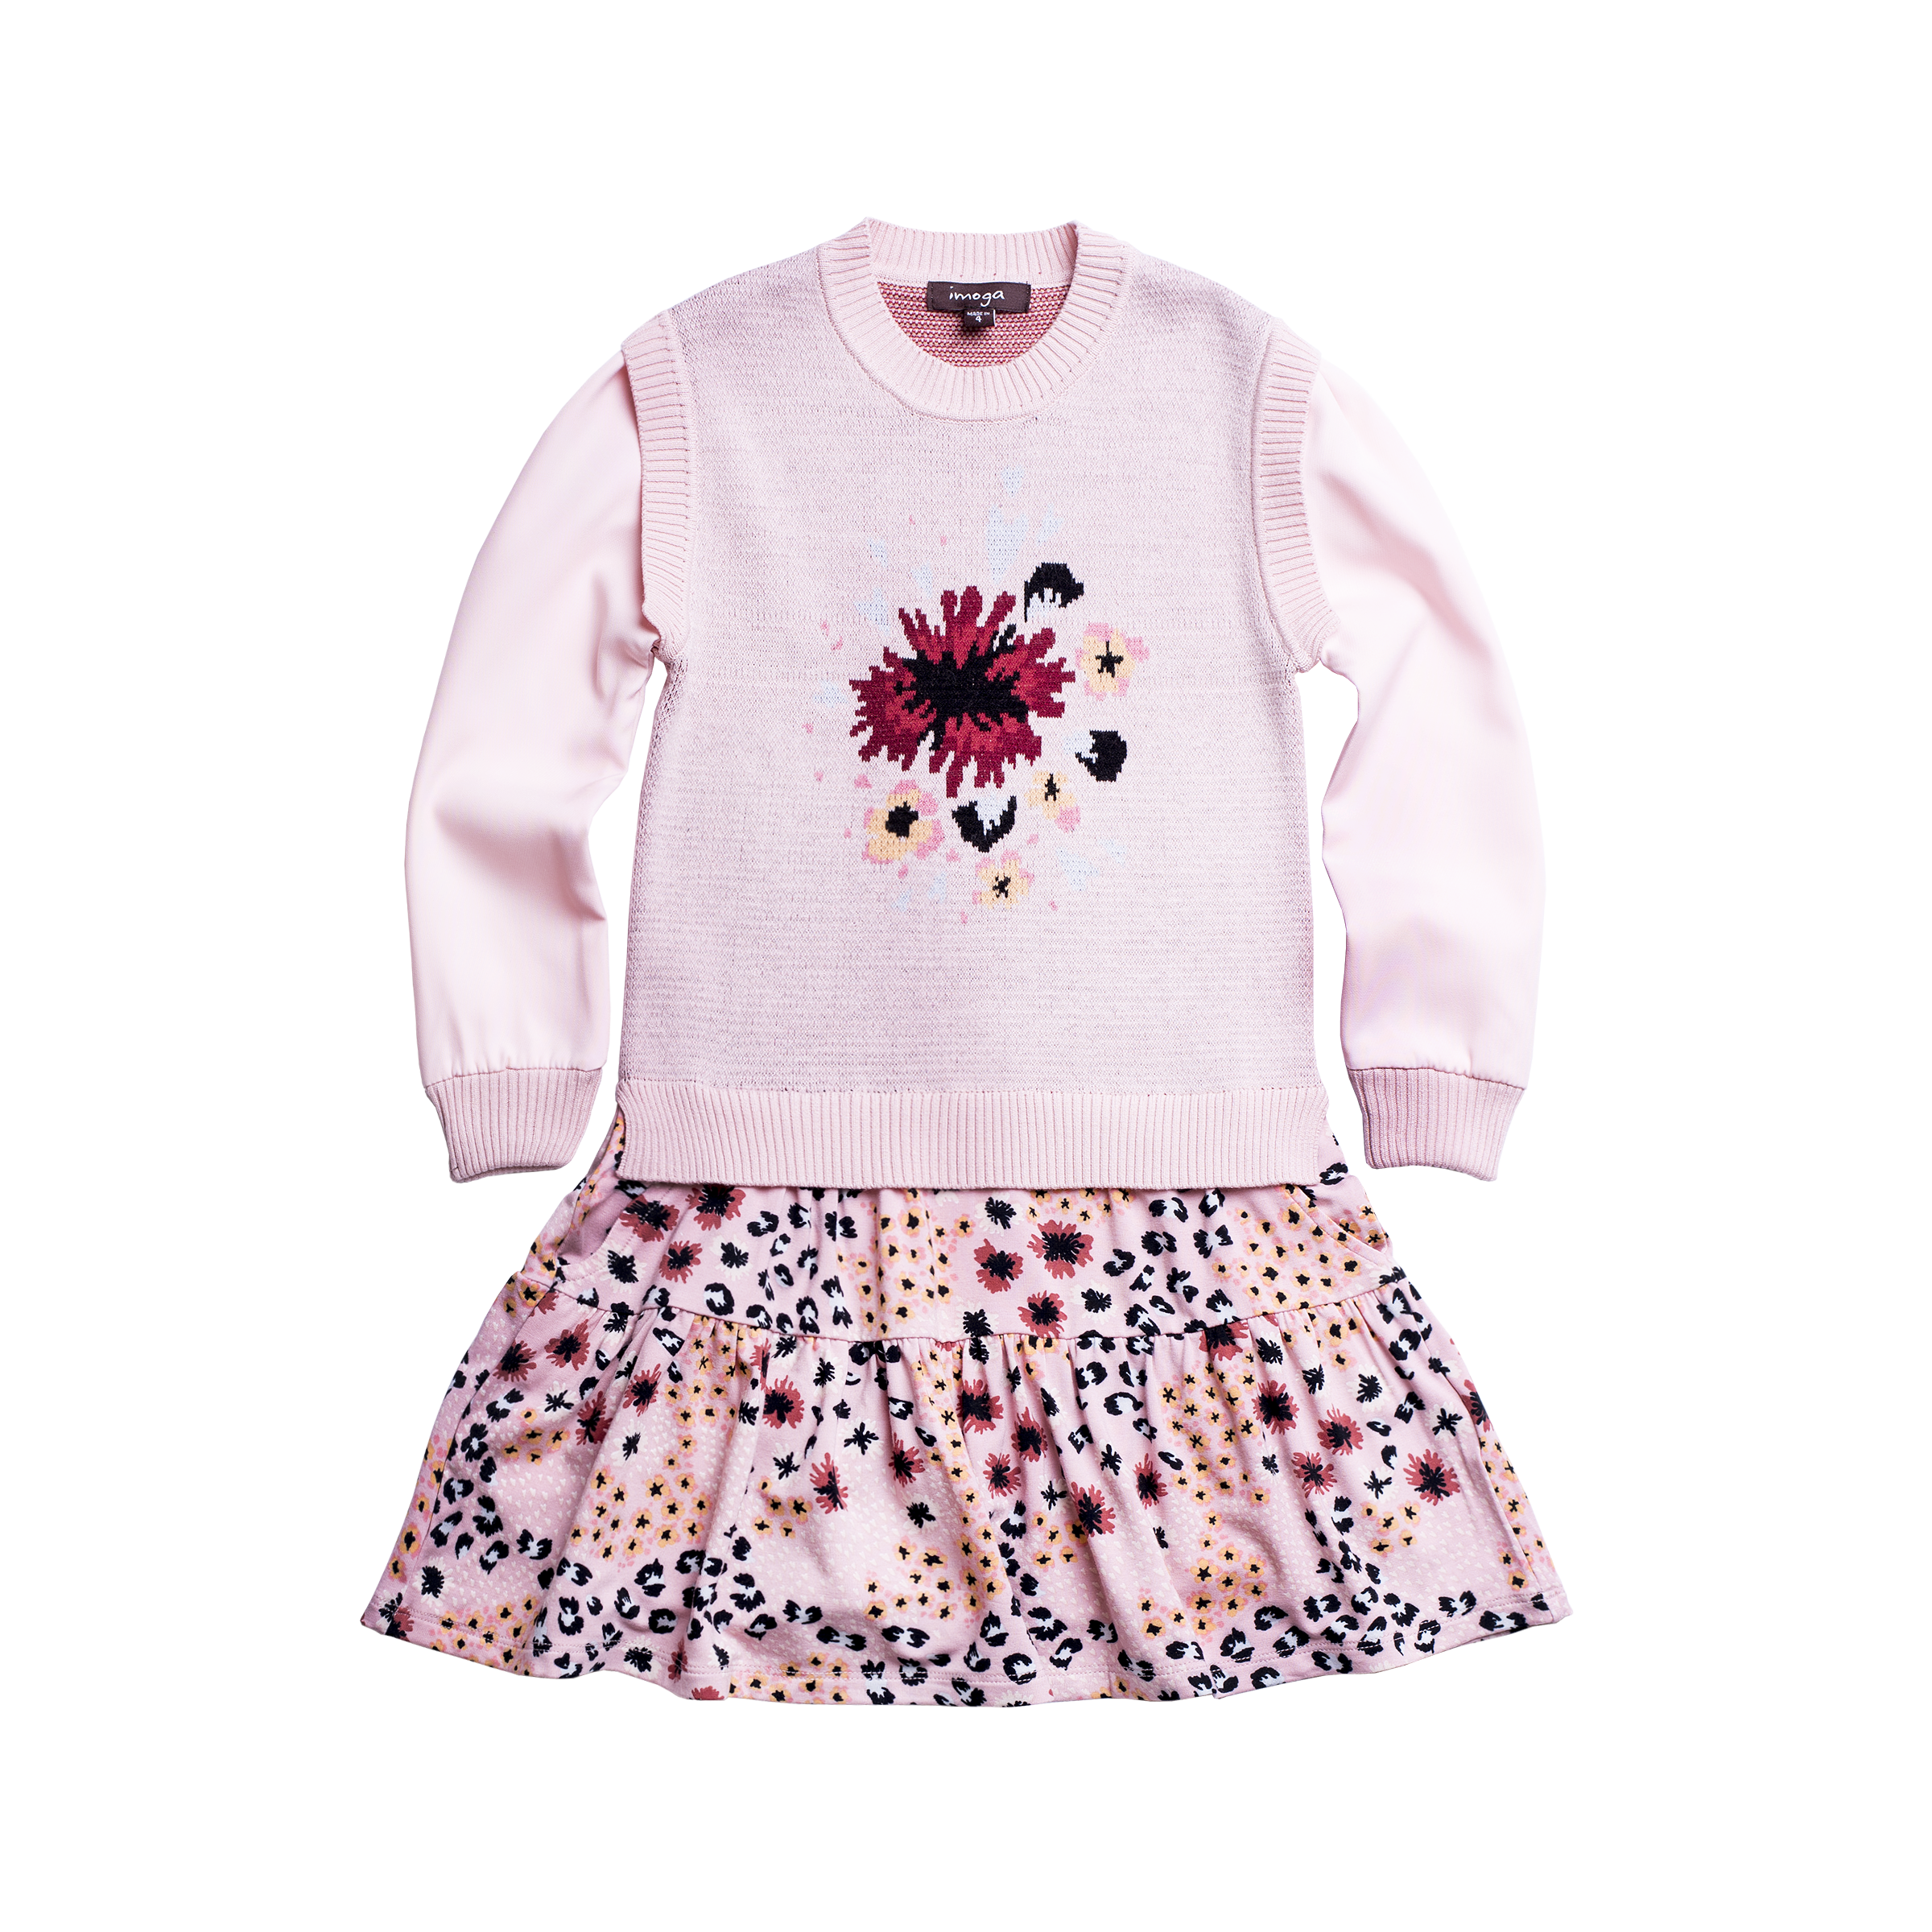 Sharon-fw22 Floral